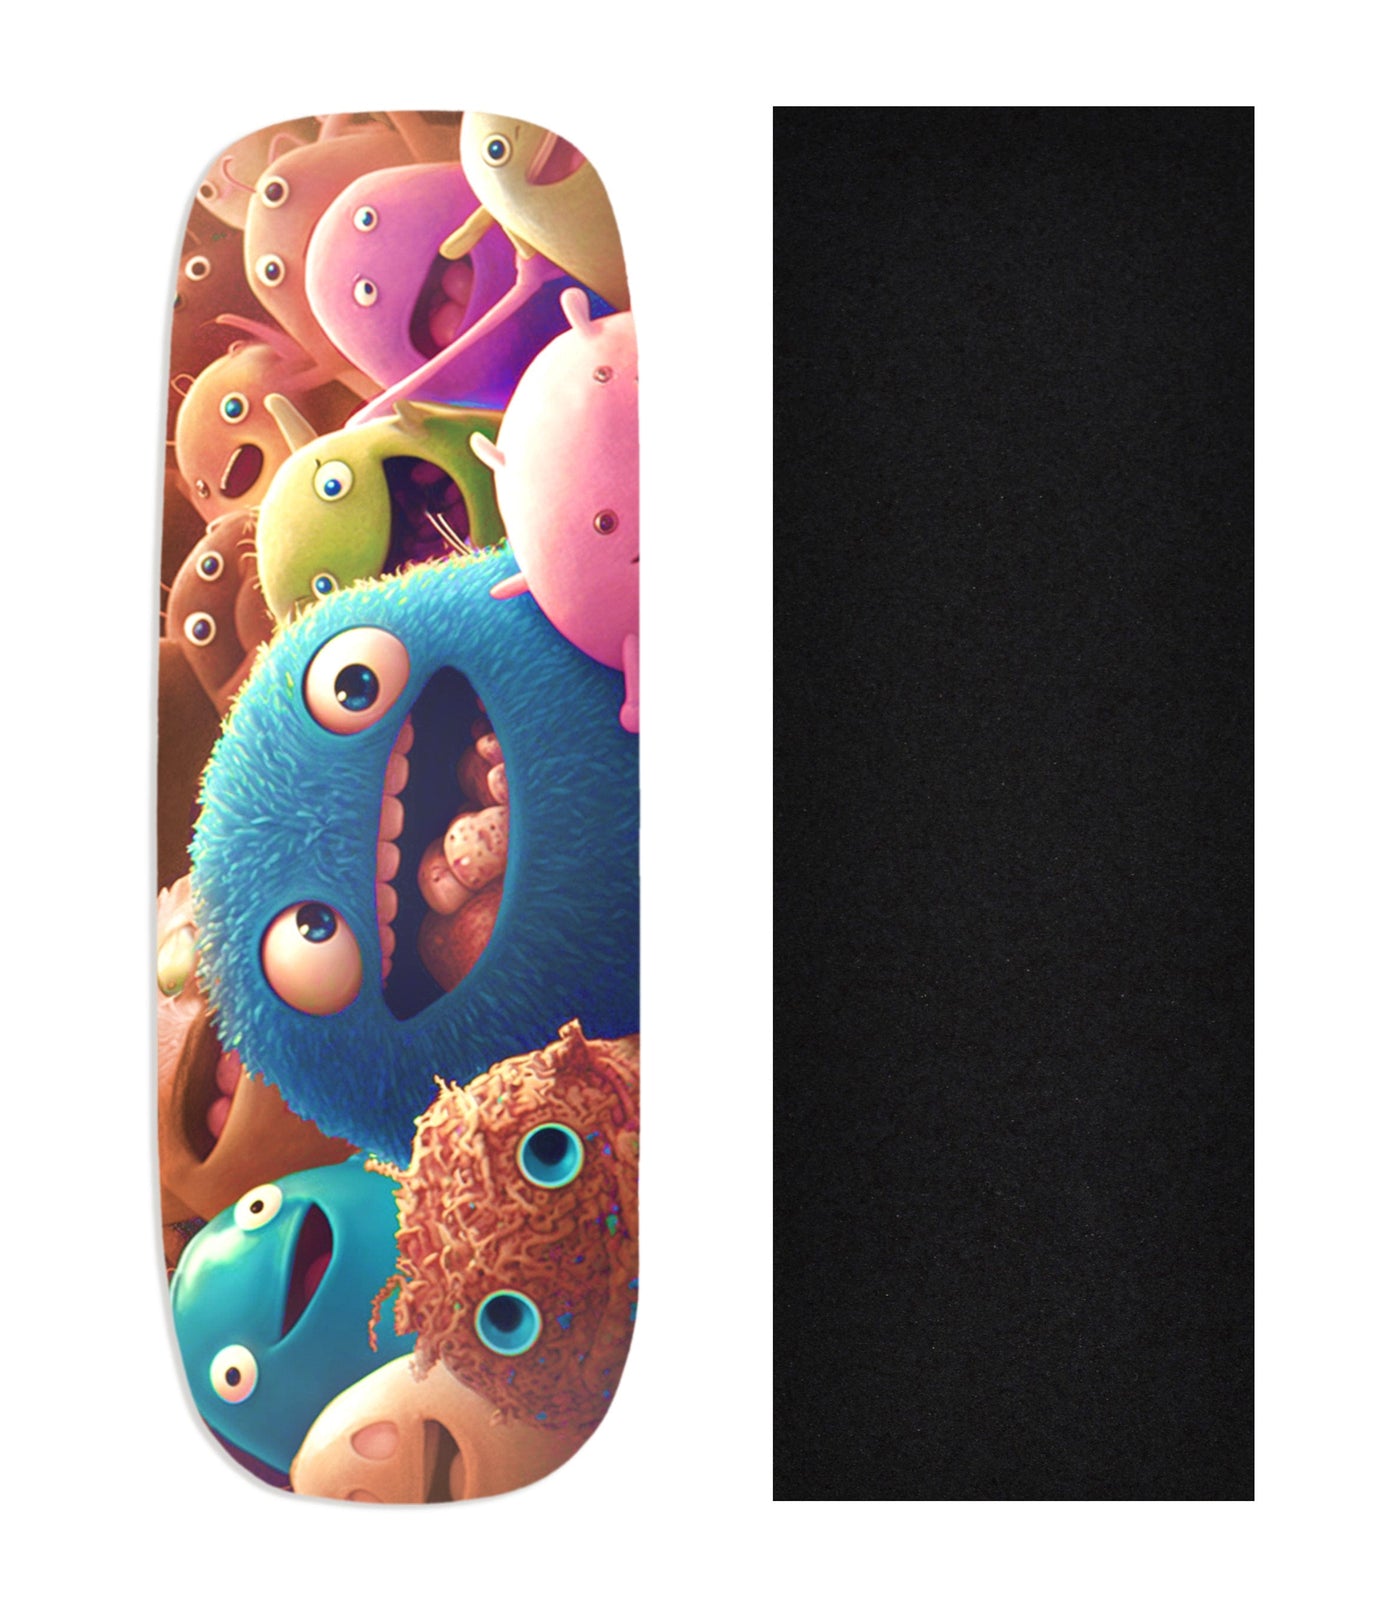 Teak Tuning Heat Transfer Graphic Wooden Fingerboard Deck, "Eager Microbes" Boxy Deck